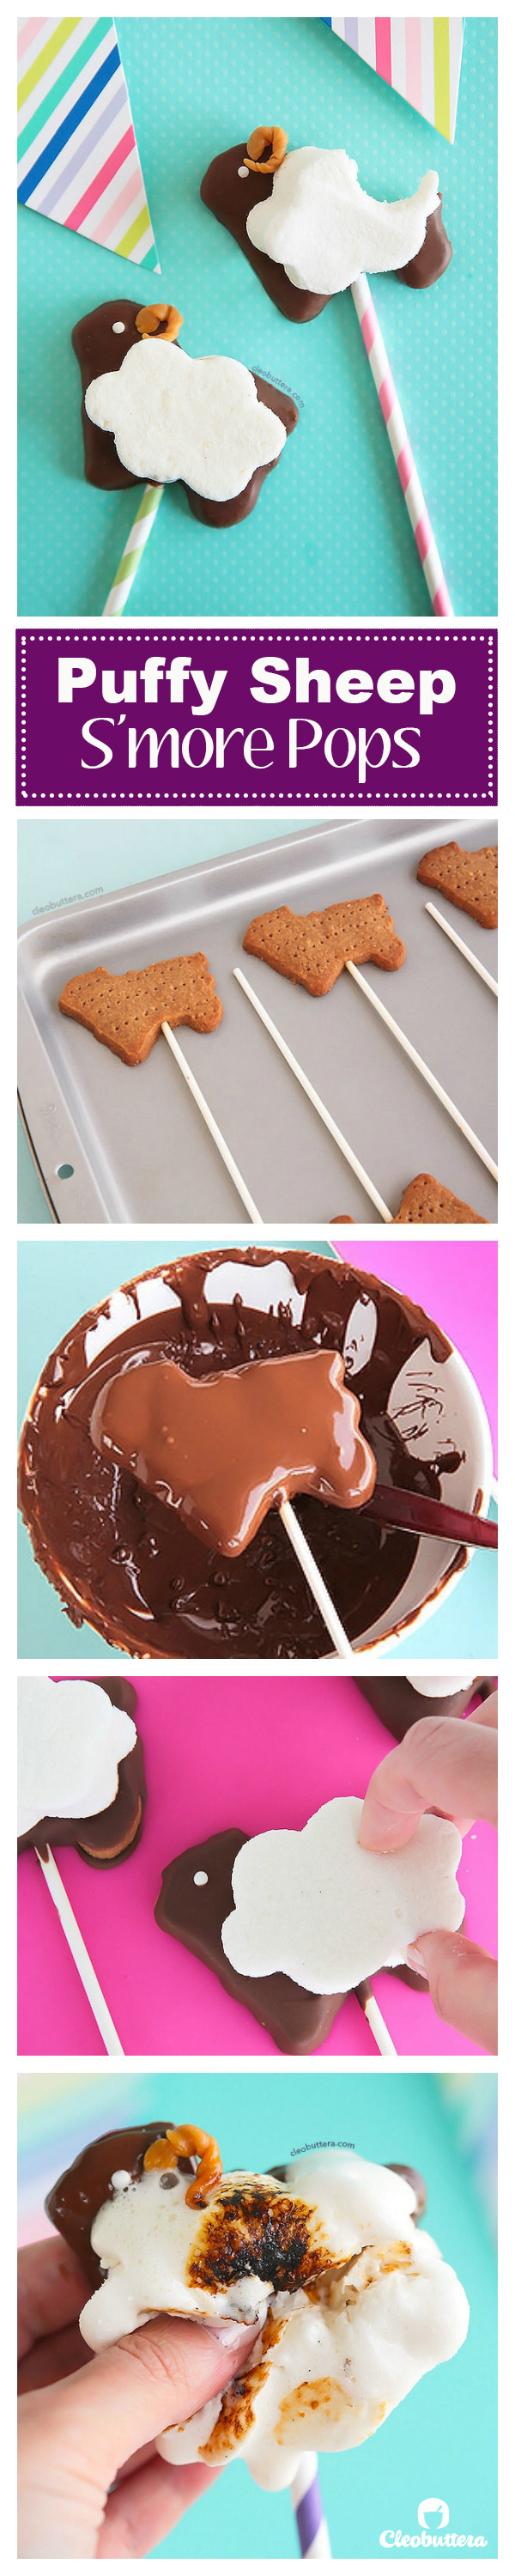 Puffy SHeep Smores pops - pinterest